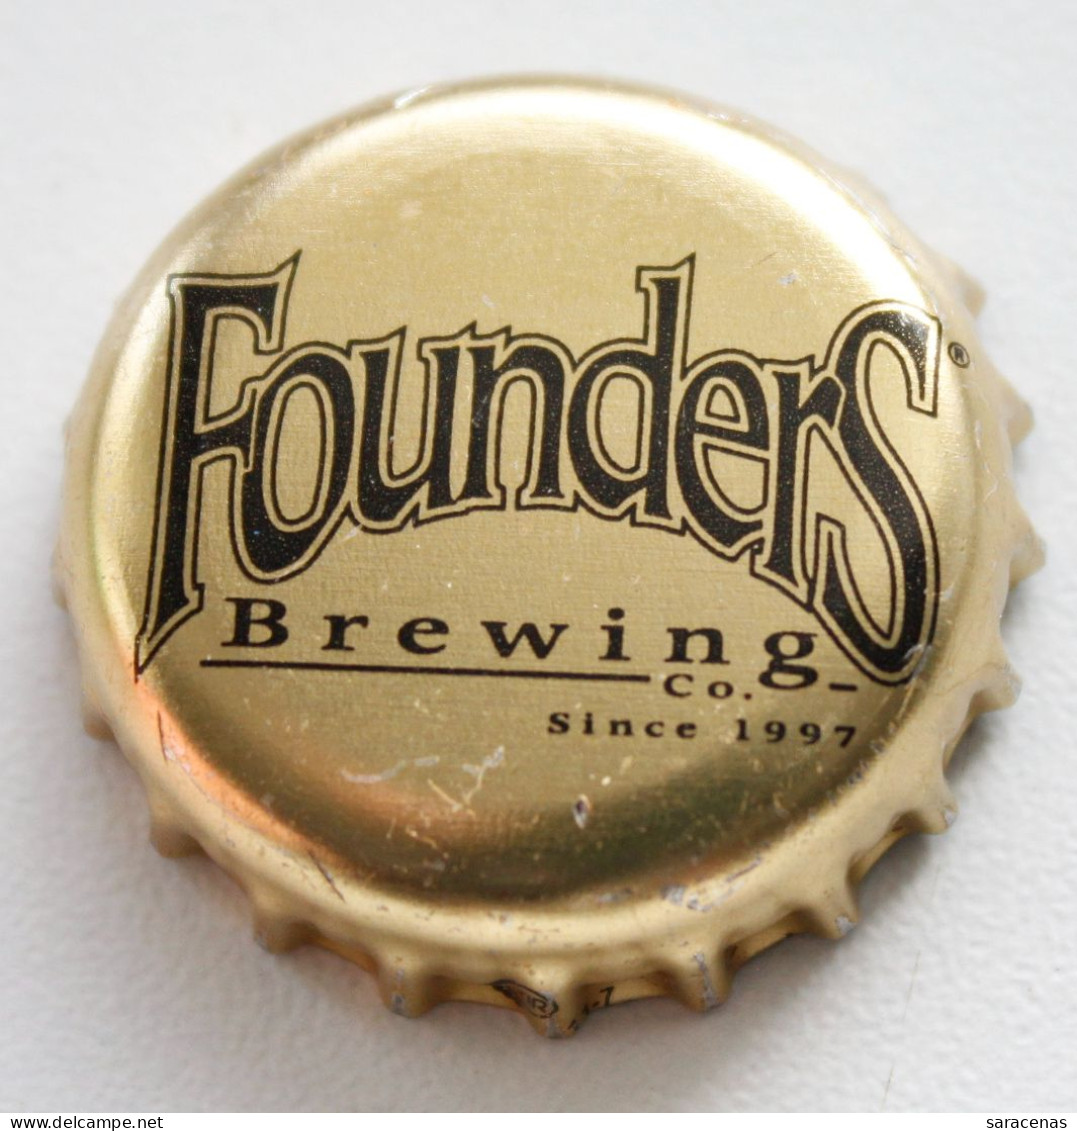 United States Founders Beer Bottle Cap - Soda